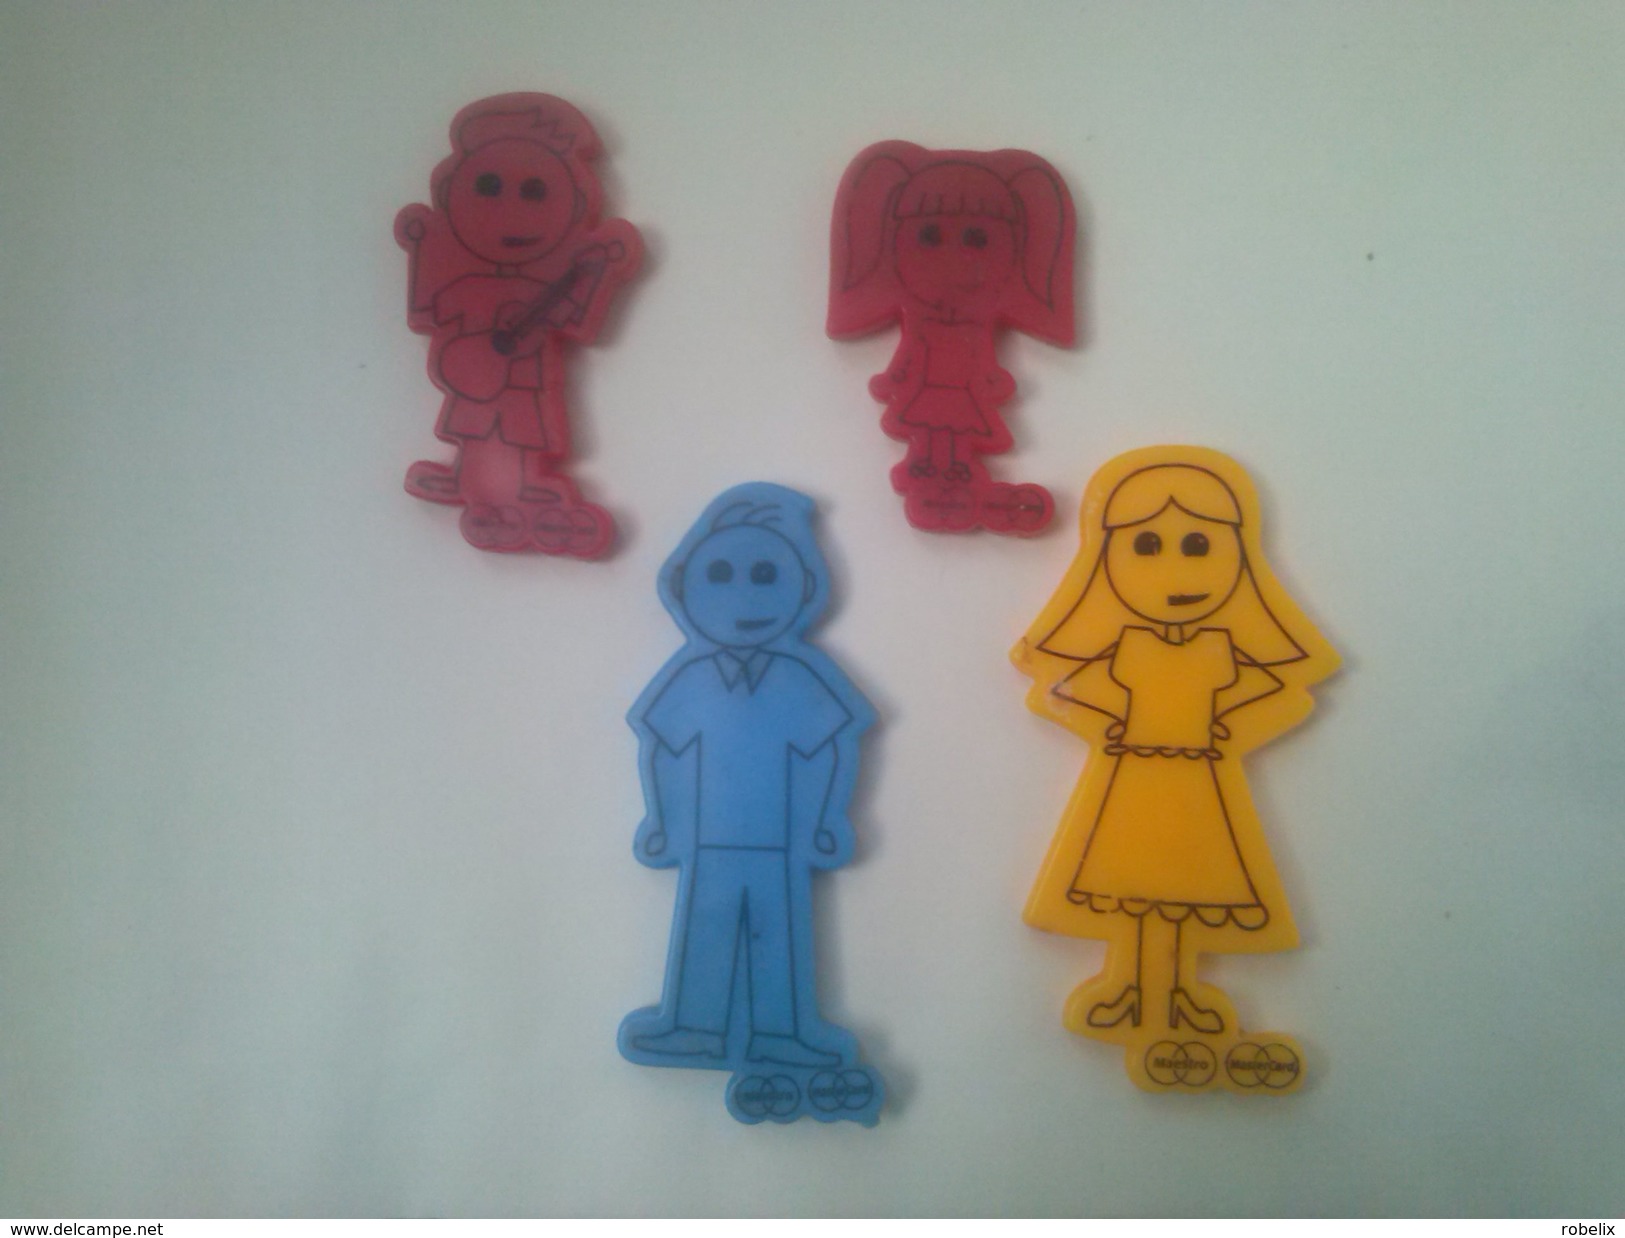 4 Magnets "Boys And Girls" (plastic-8 Cm)  30 Gr - Characters